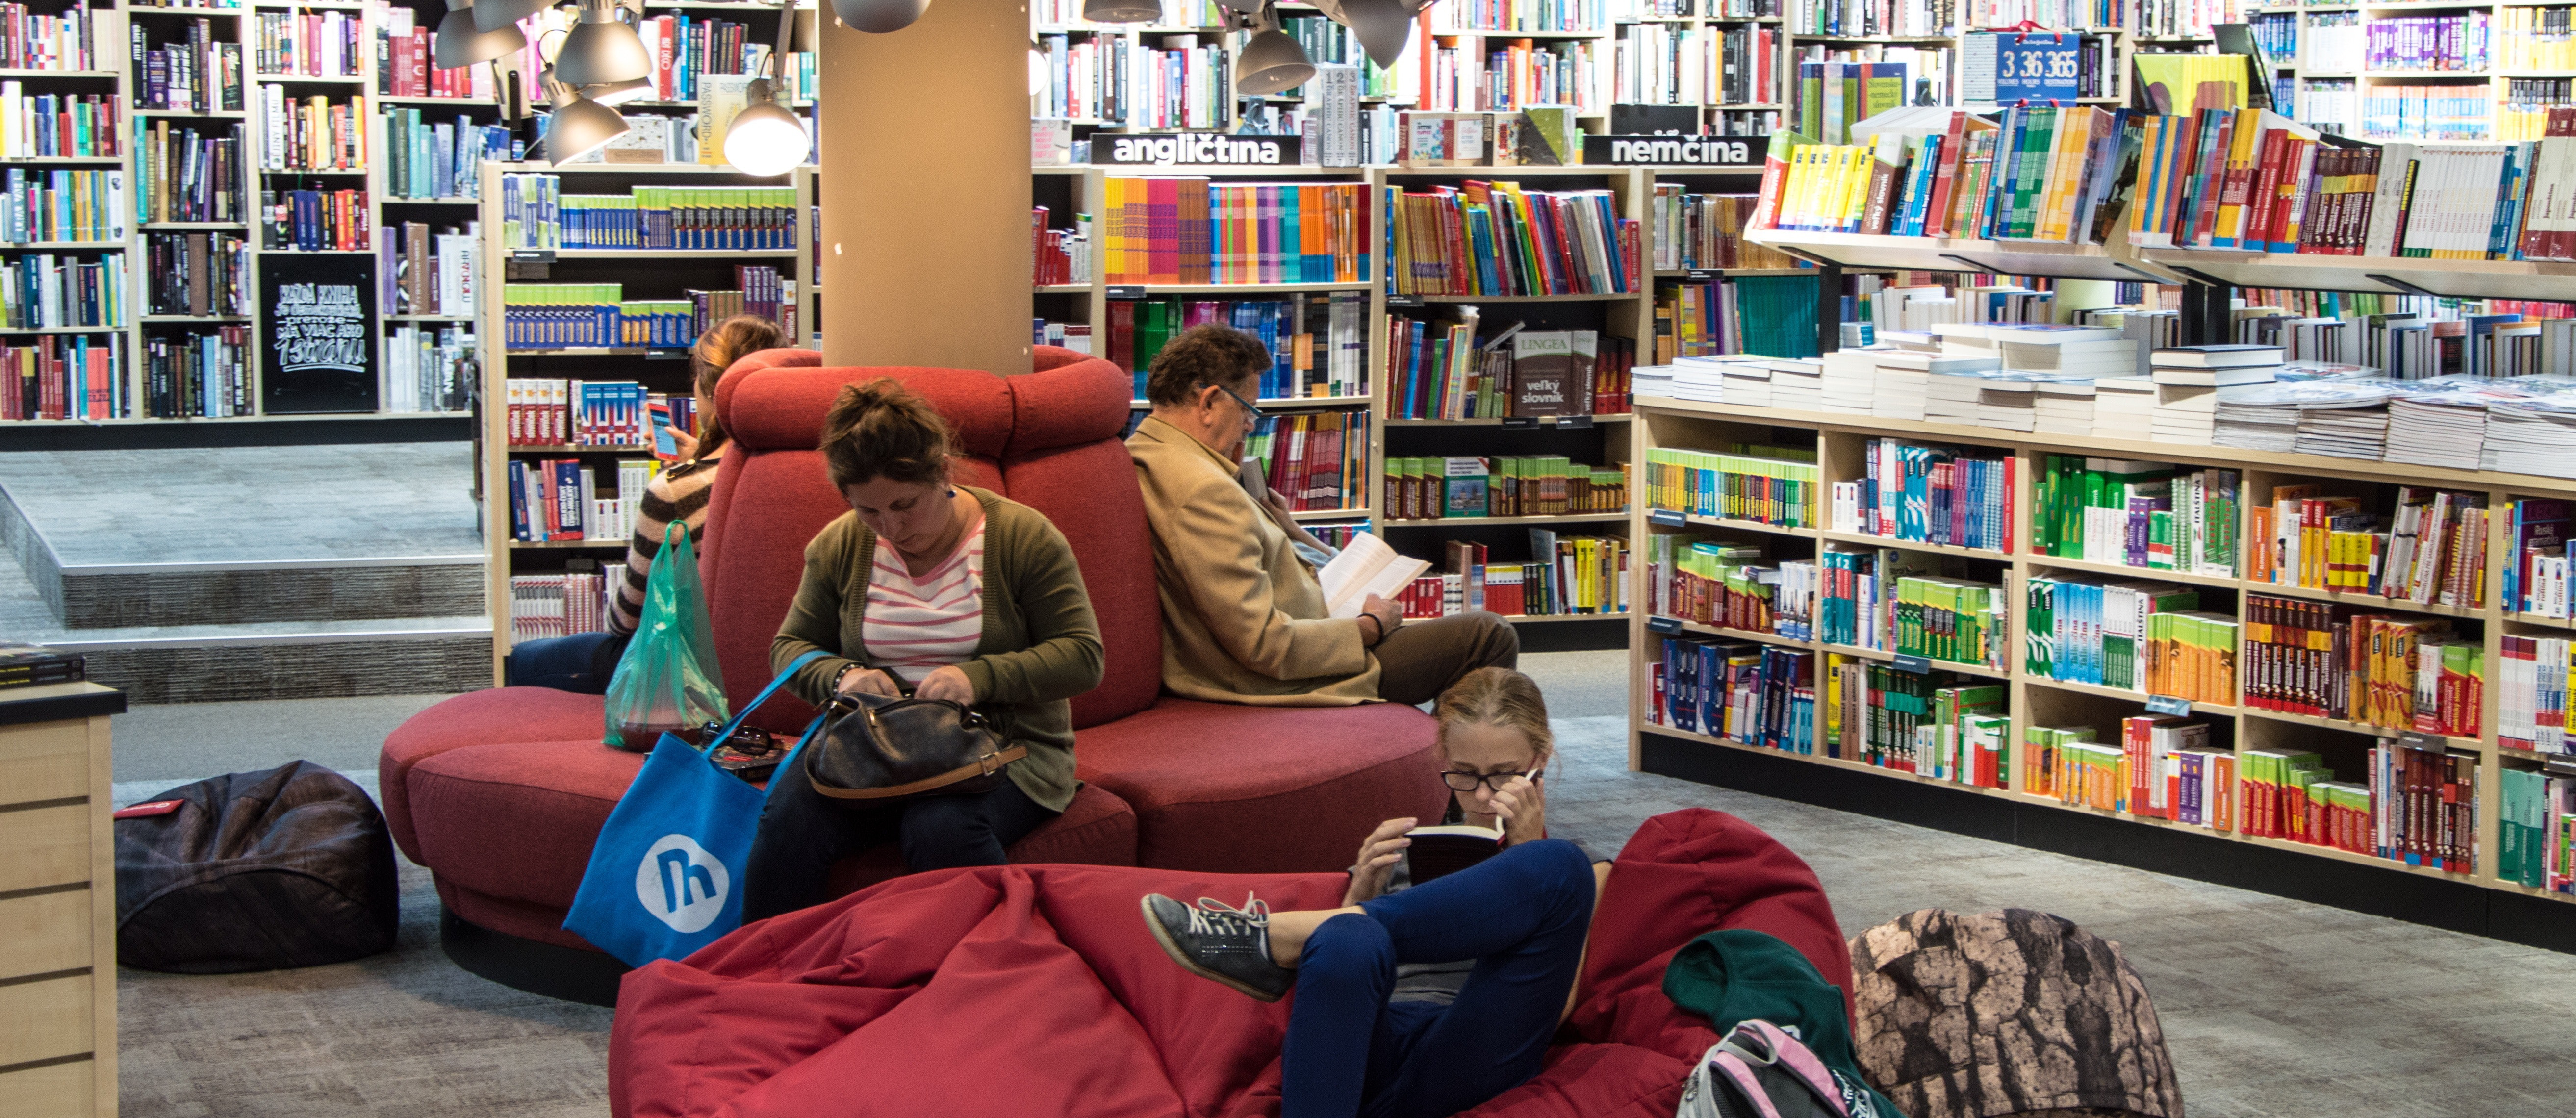 A candid photo of people sitting and reading at a library or book store